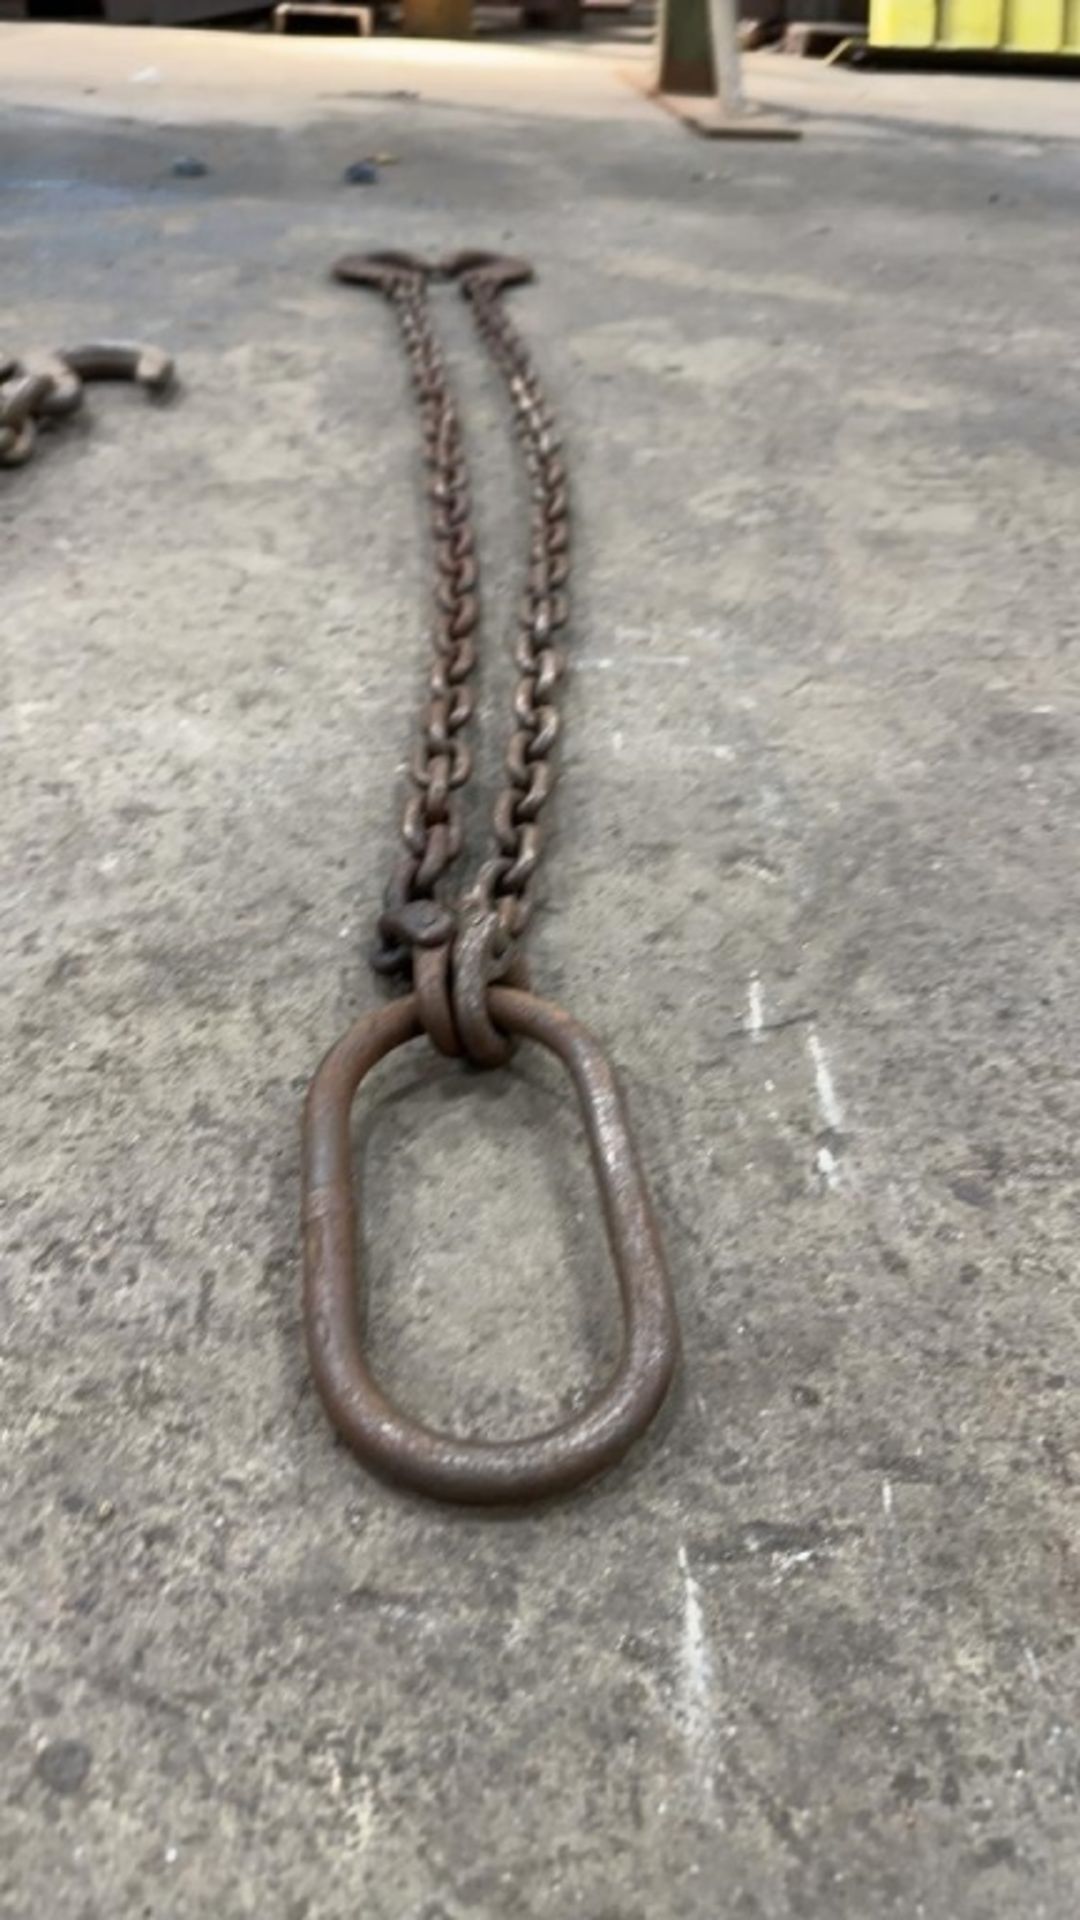 4ft & 2ft Chains on Rigging Rings with Hoist Hooks - Image 6 of 8